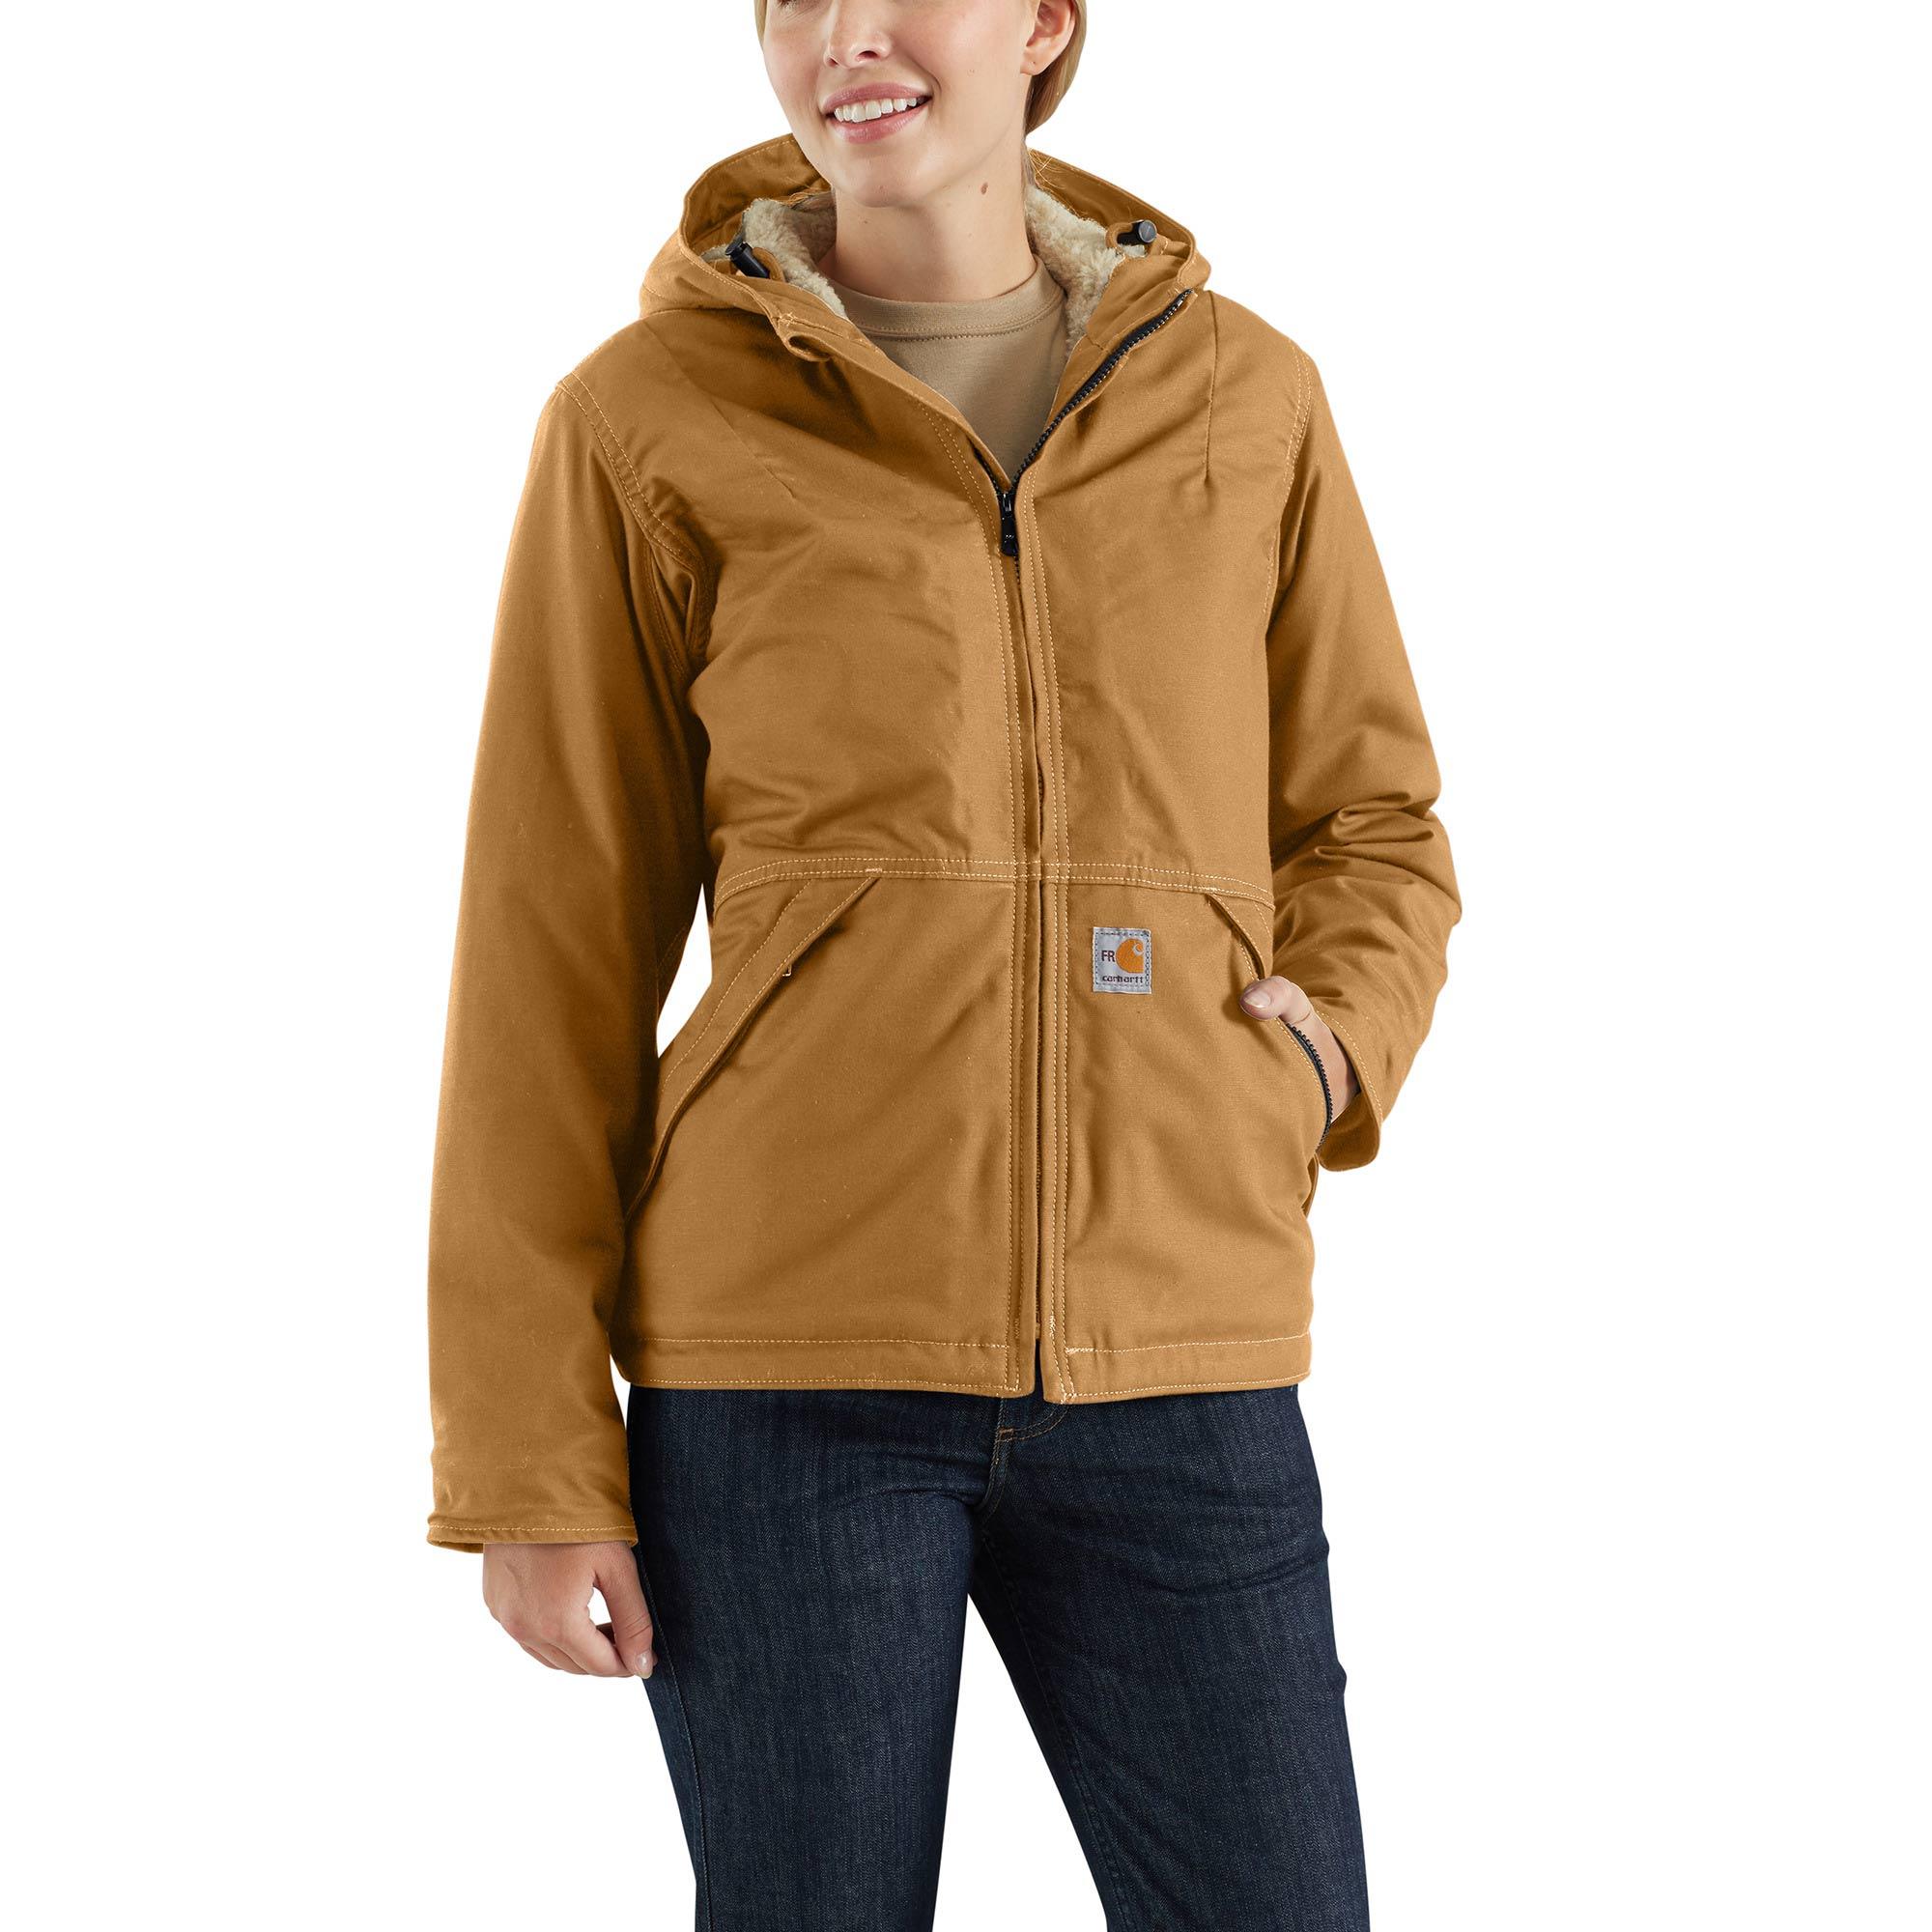 https://www.froutlet.com/resize/Shared/Images/Product/Women-s-Carhartt-FR-Full-Swing-Quick-Duck-Jacket-Carhartt-Brown/102694-211.jpg?bw=1000&w=1000&bh=1000&h=1000